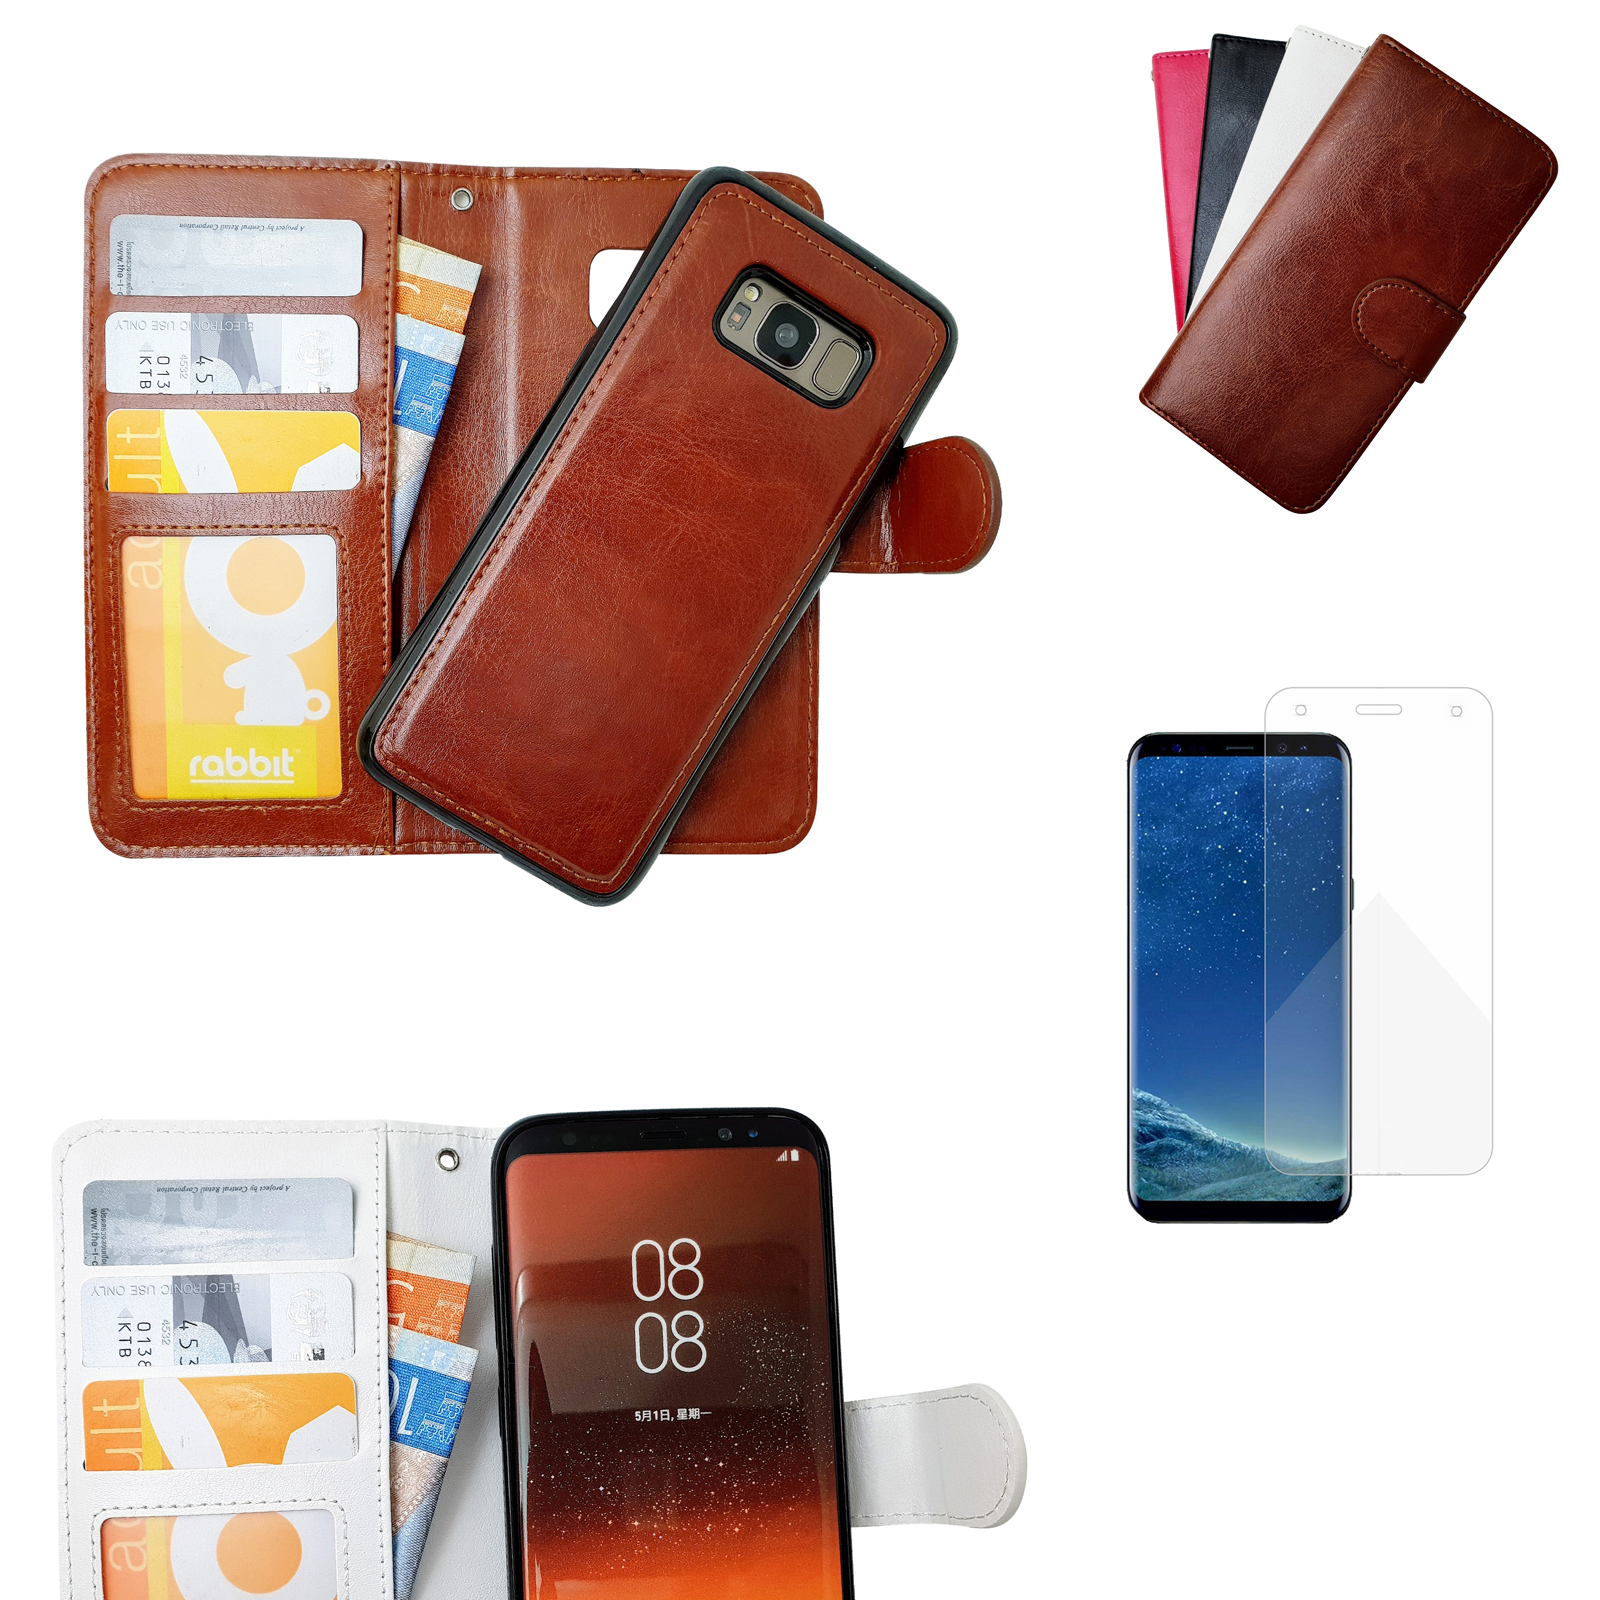 Samsung Galaxy S8 Plus - Leather Case/Wallet + Protection